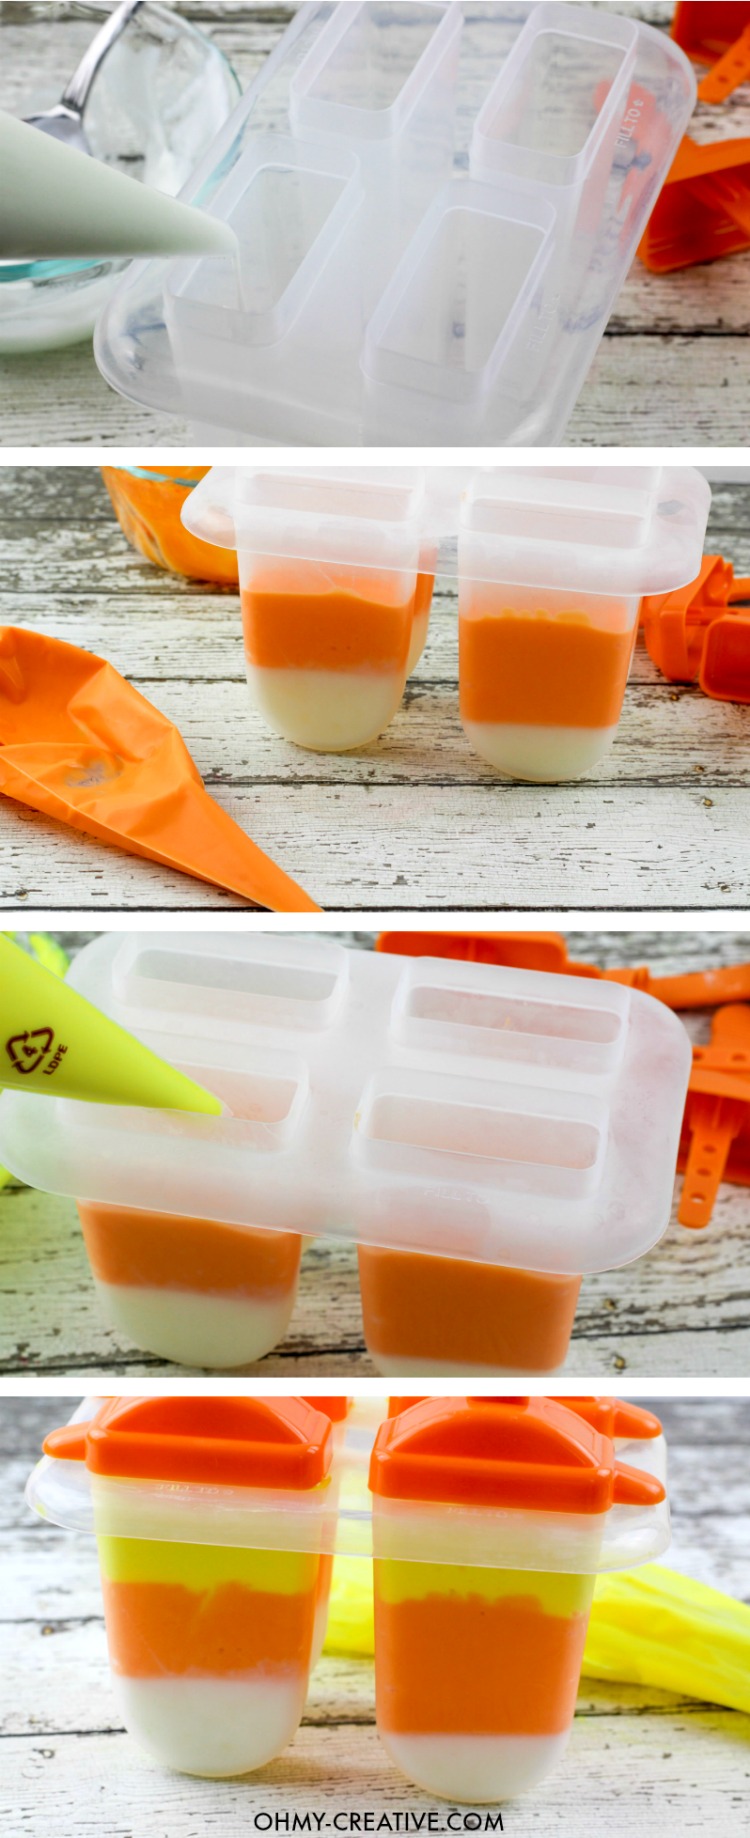 Yogurt Candy Corn Popsicle! Yellow, orange and white popsicles |  OHMY-CREATIVE.COM | Candy Corn Dessert Recipes | recipes using candy corn | Homemade candy corn | Halloween Treat | Halloween Dessert |  Ideas for candy corn